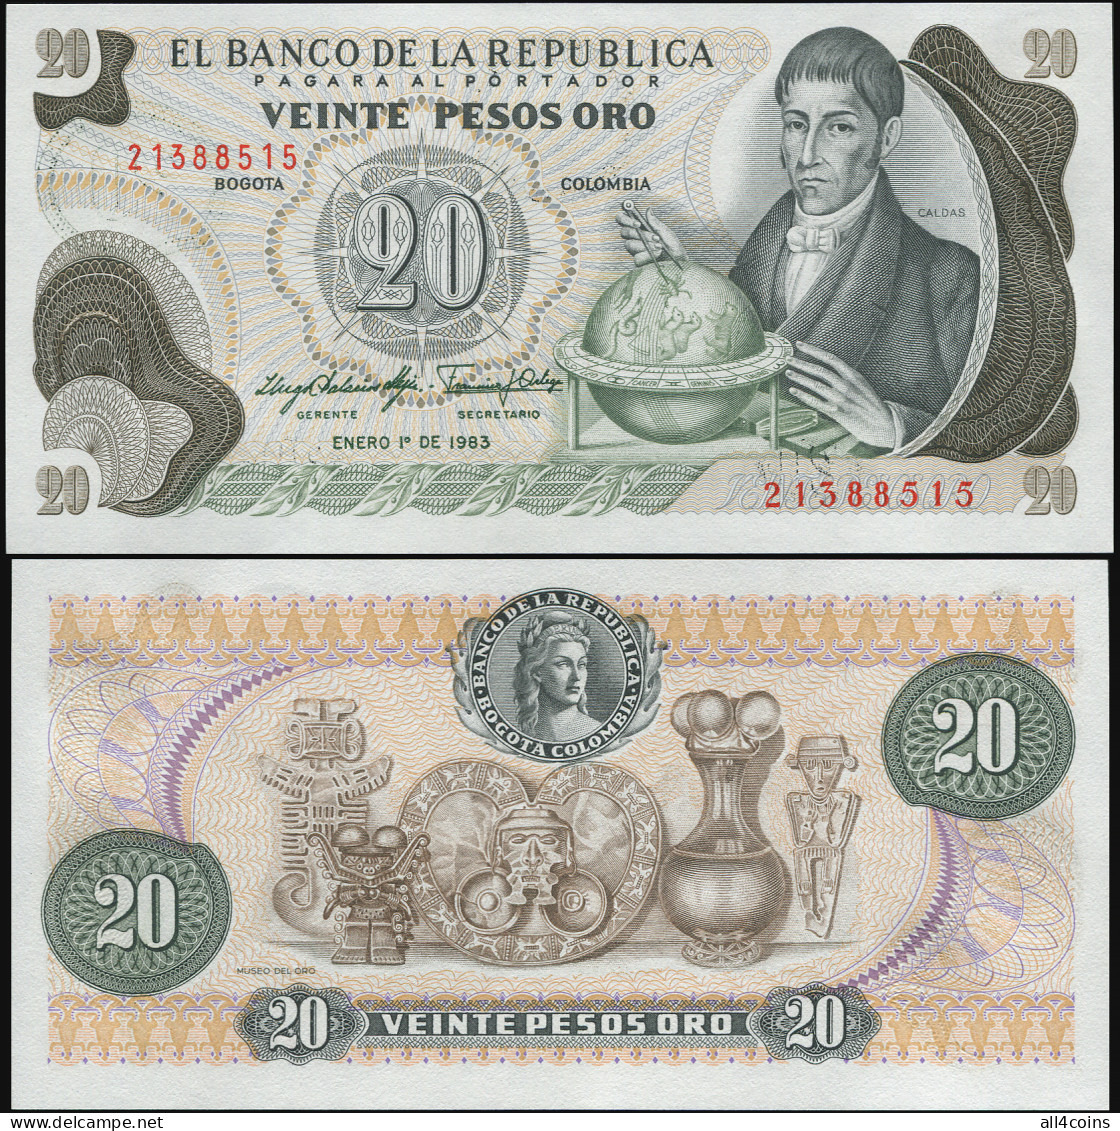 Colombia 20 Pesos Oro. 01.01.1983 Unc. Banknote Cat# P.409d - Colombia